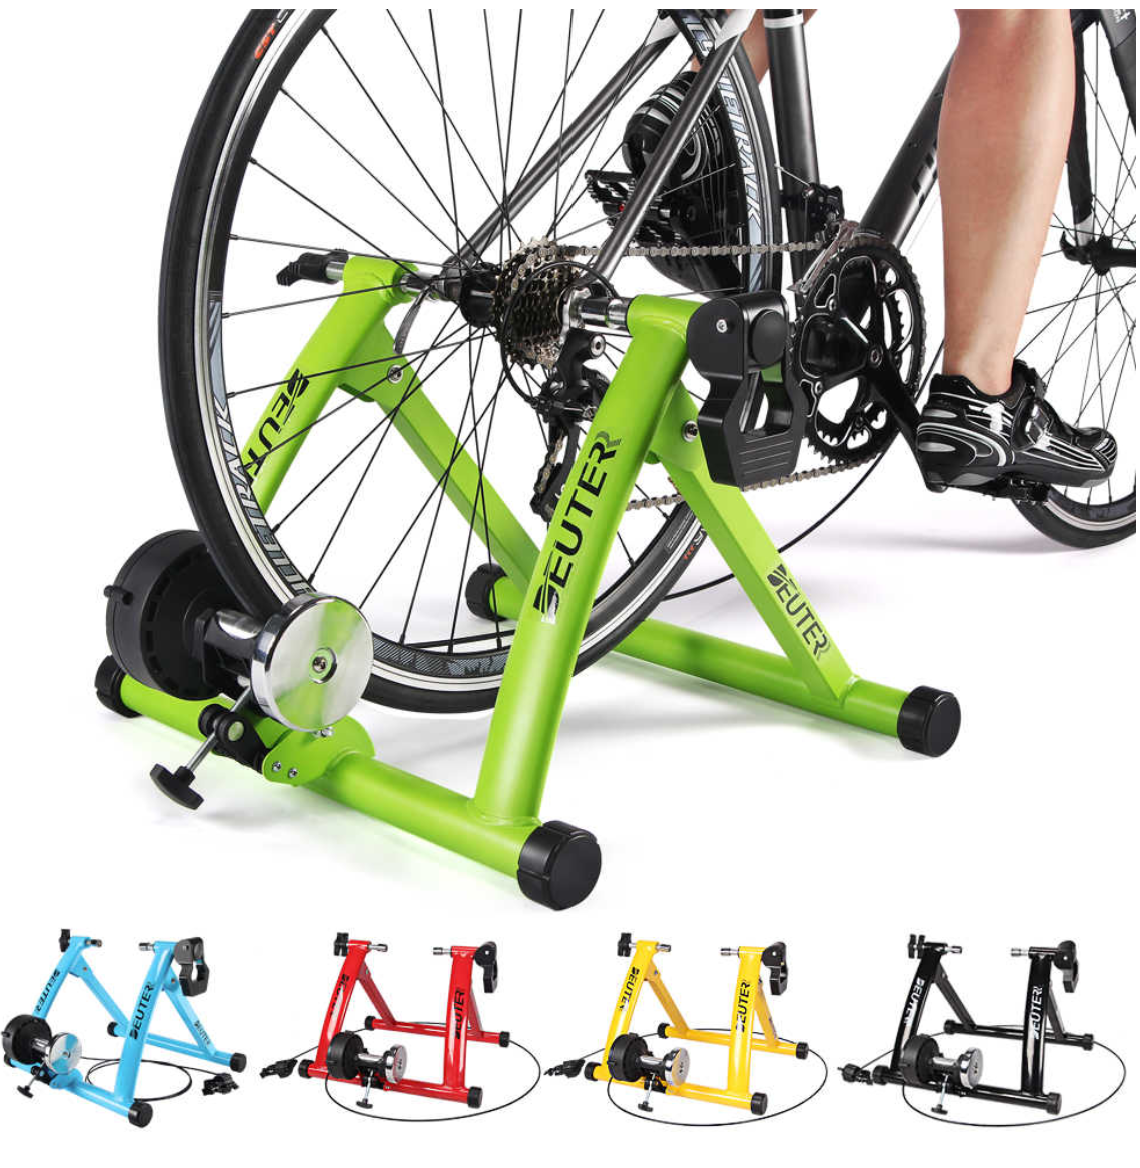 Pro Cycle Trainer - 6 Speed Magnetic Resistance Cycle Trainer - Summit MX Shop